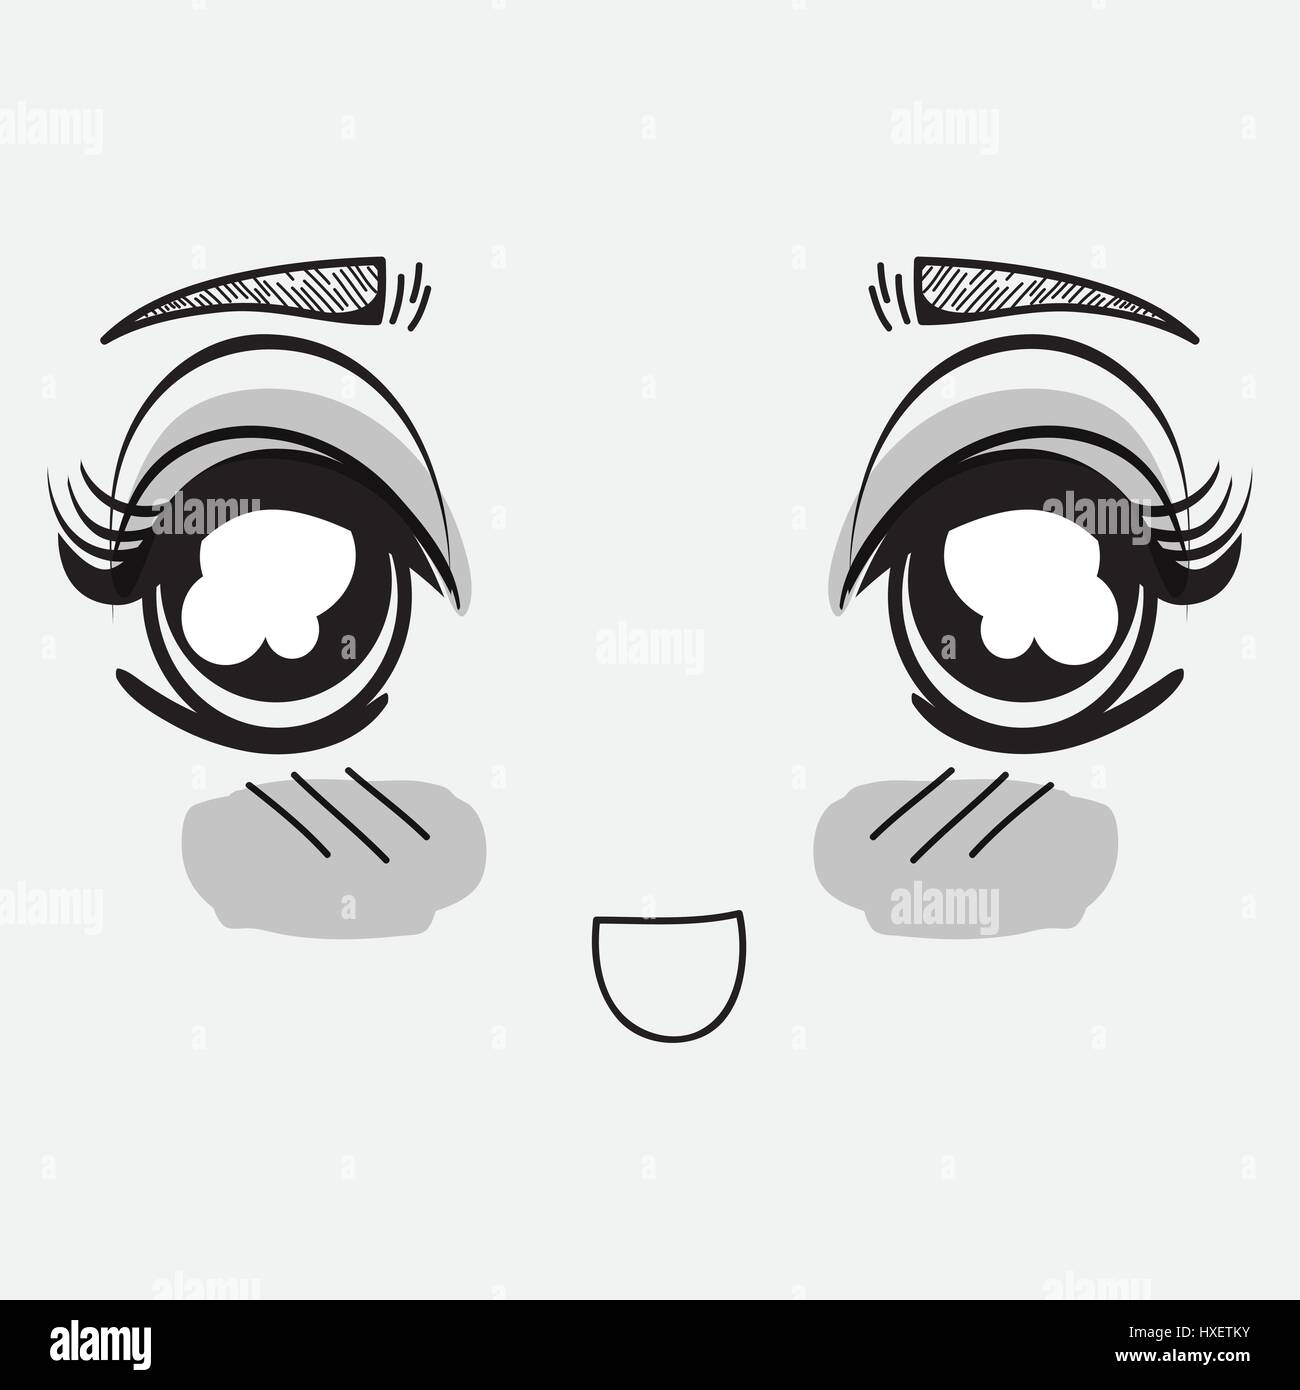 Surprised Face Illustration High Resolution Stock Photography and ...